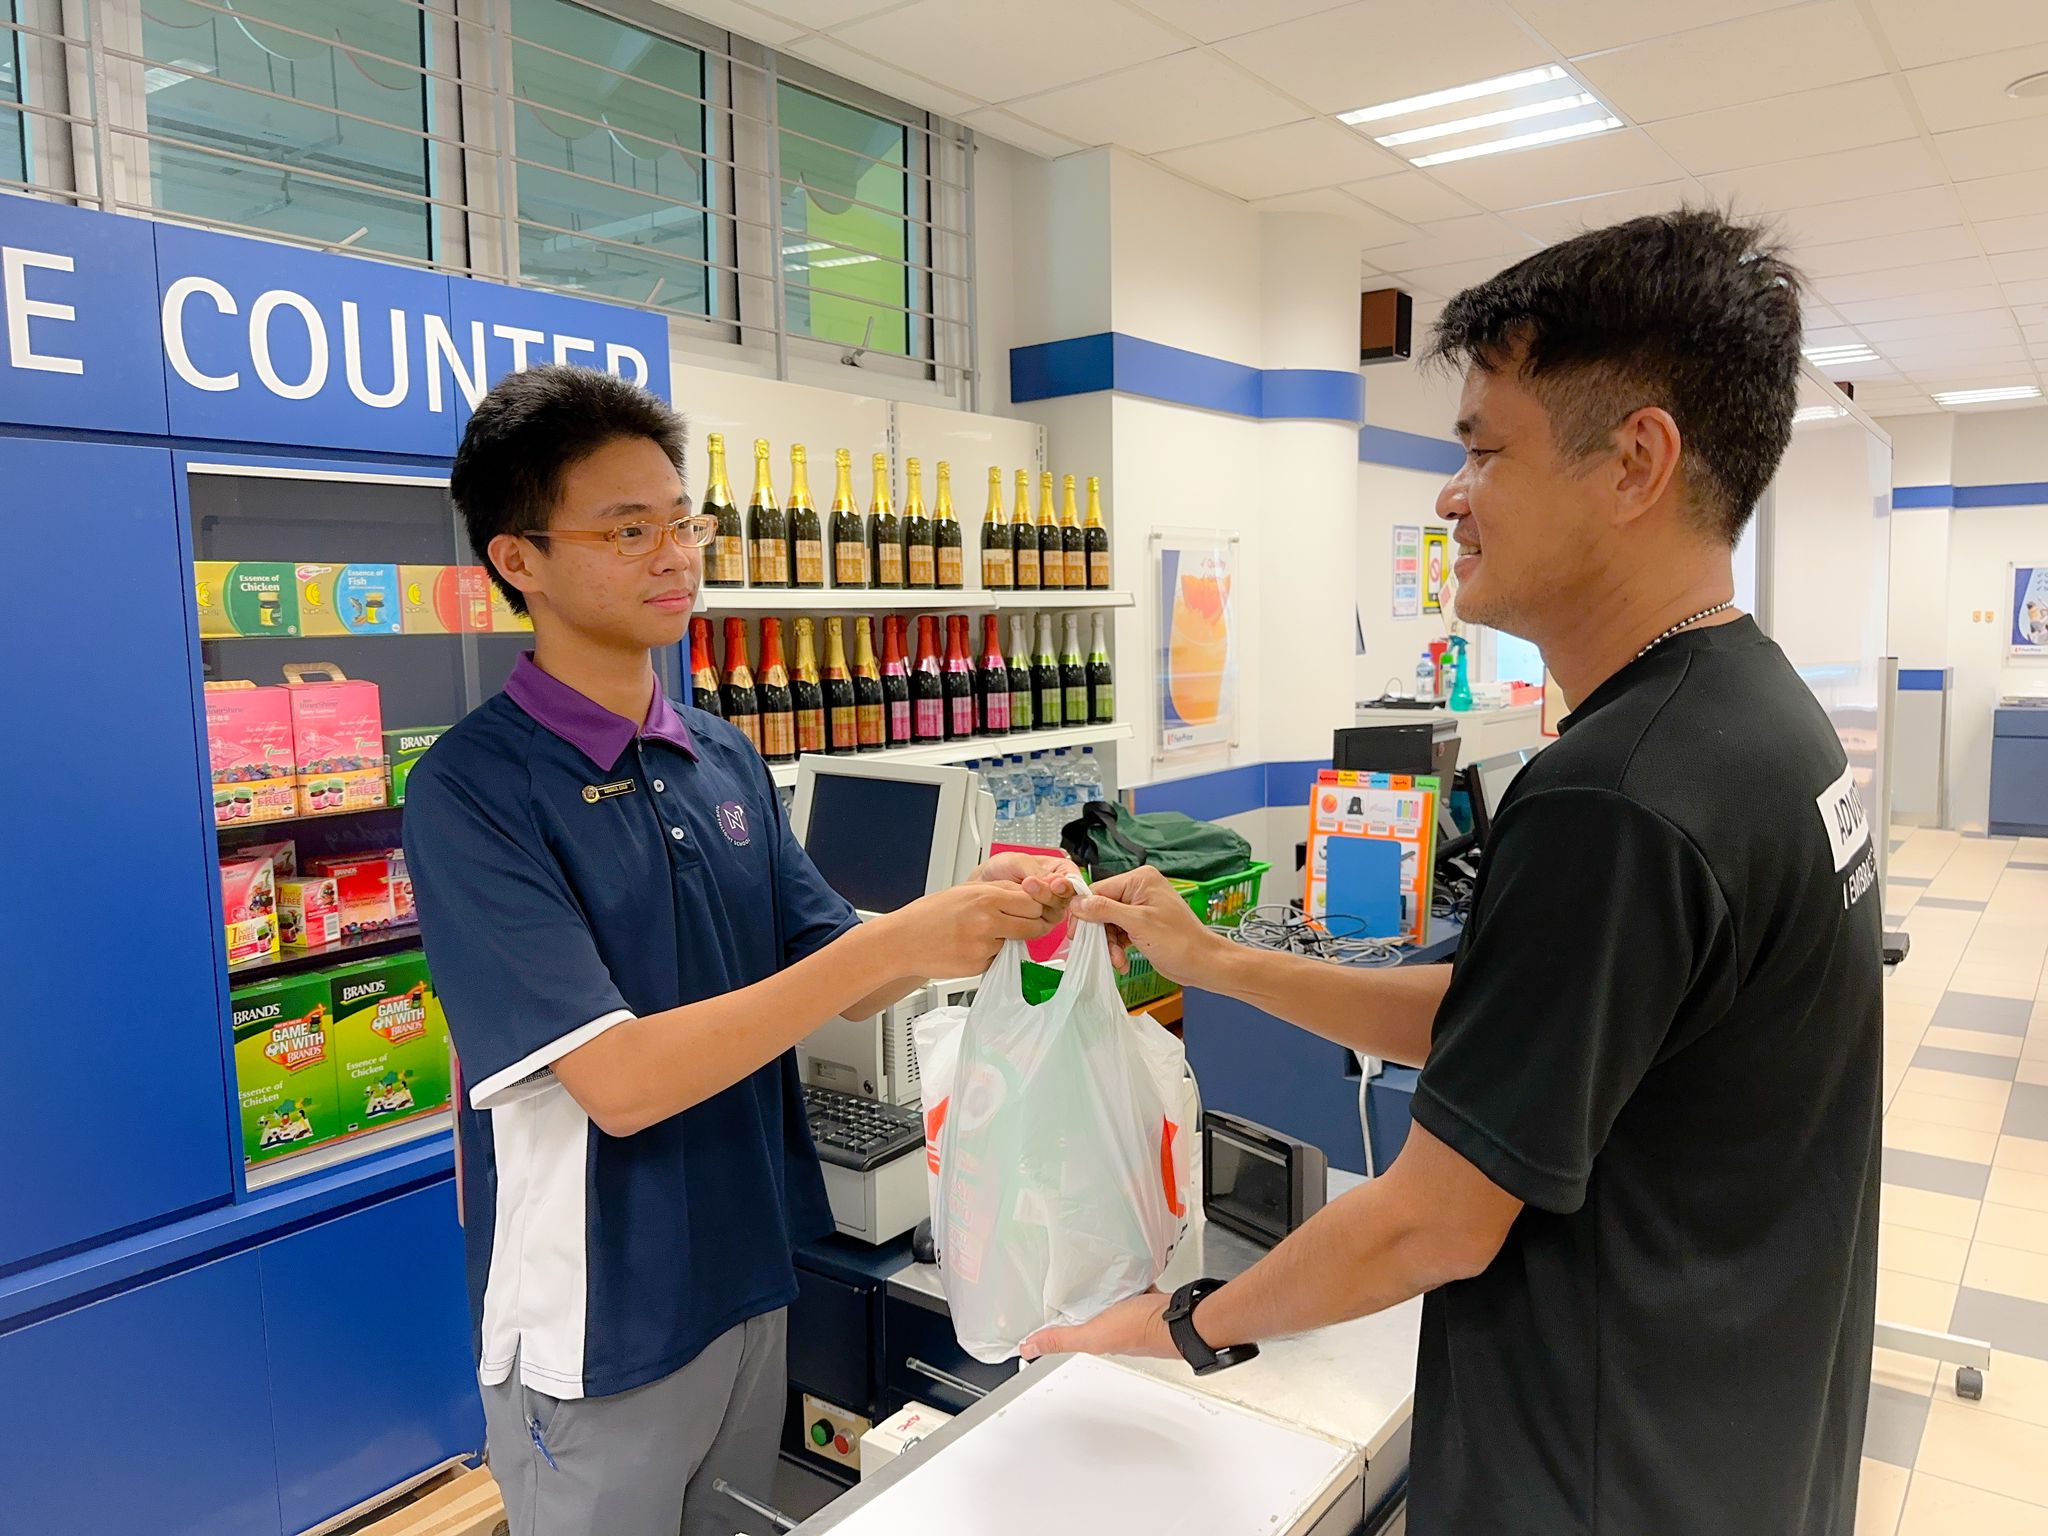 Point-of-Sale Operations